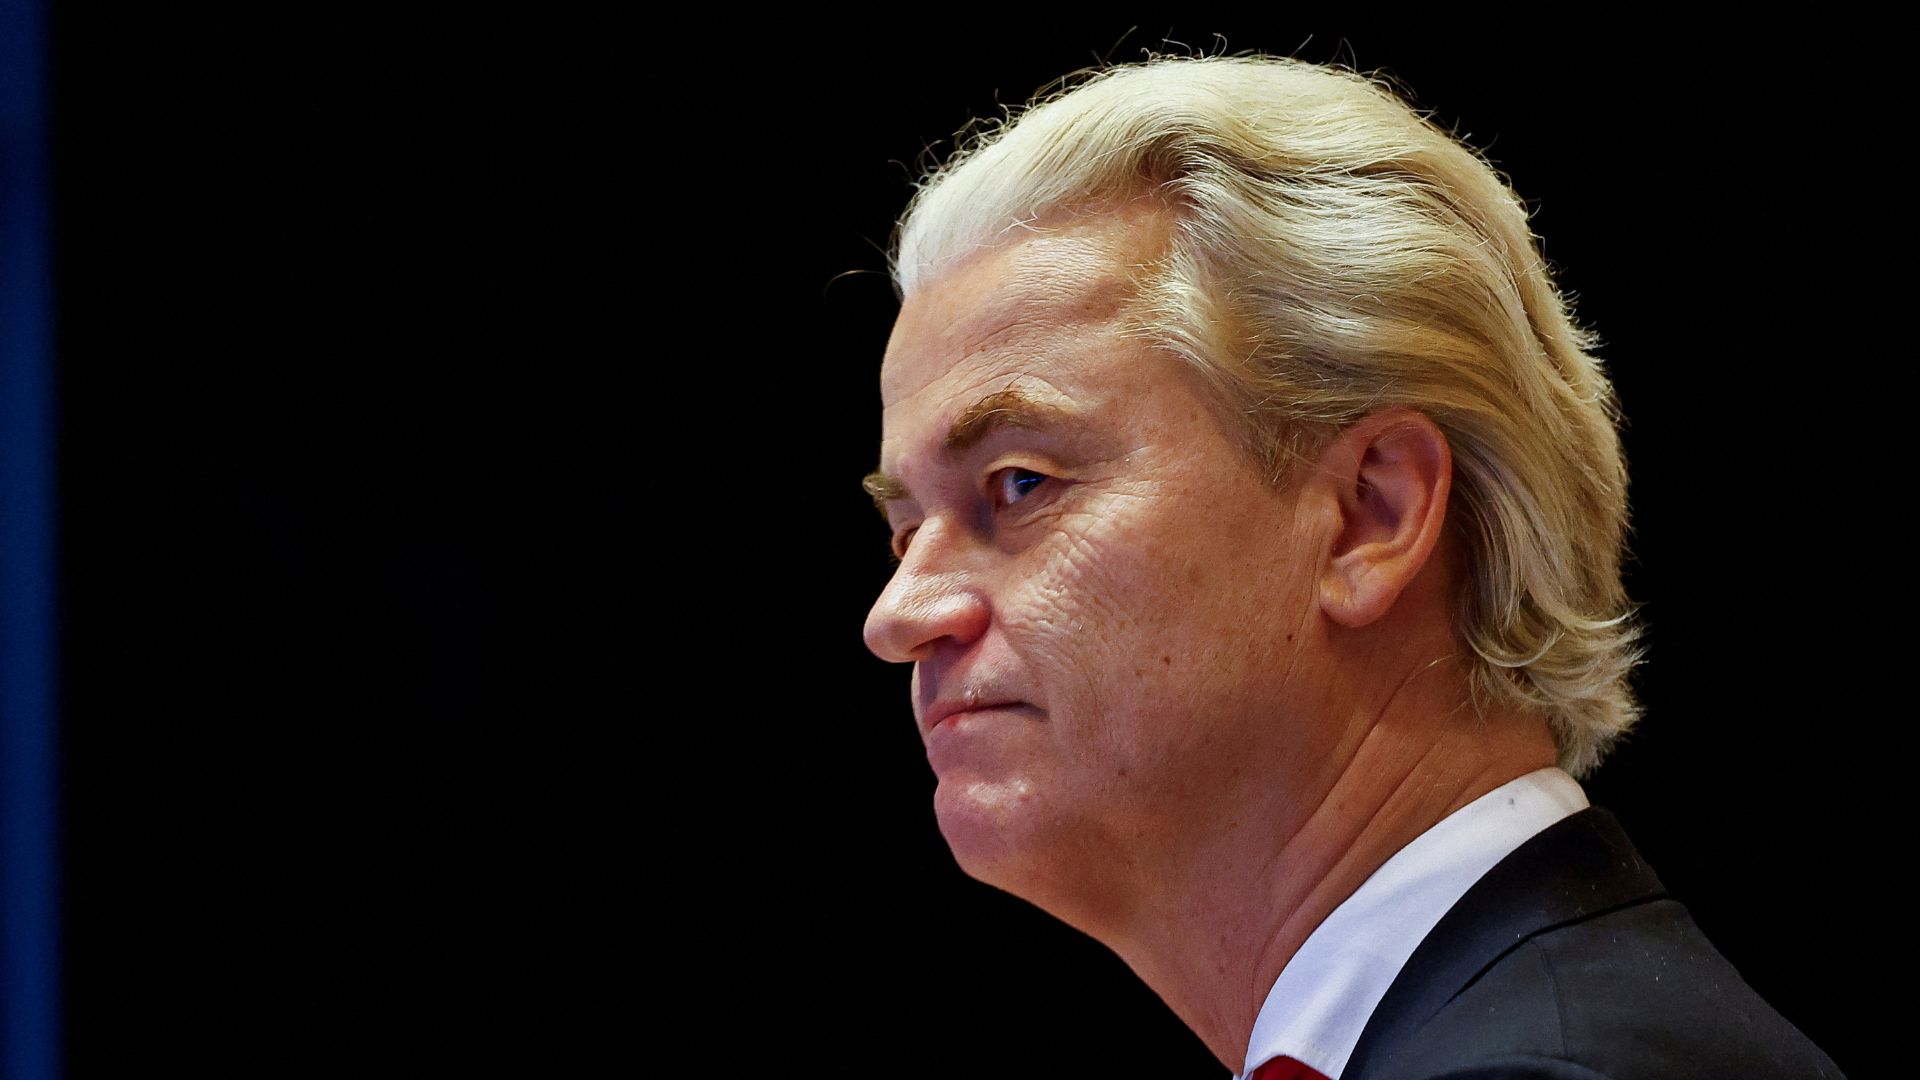 Dutch far-right politician and leader of the PVV party Geert Wilders. /Piroschka van de Wouw/Reuters/File